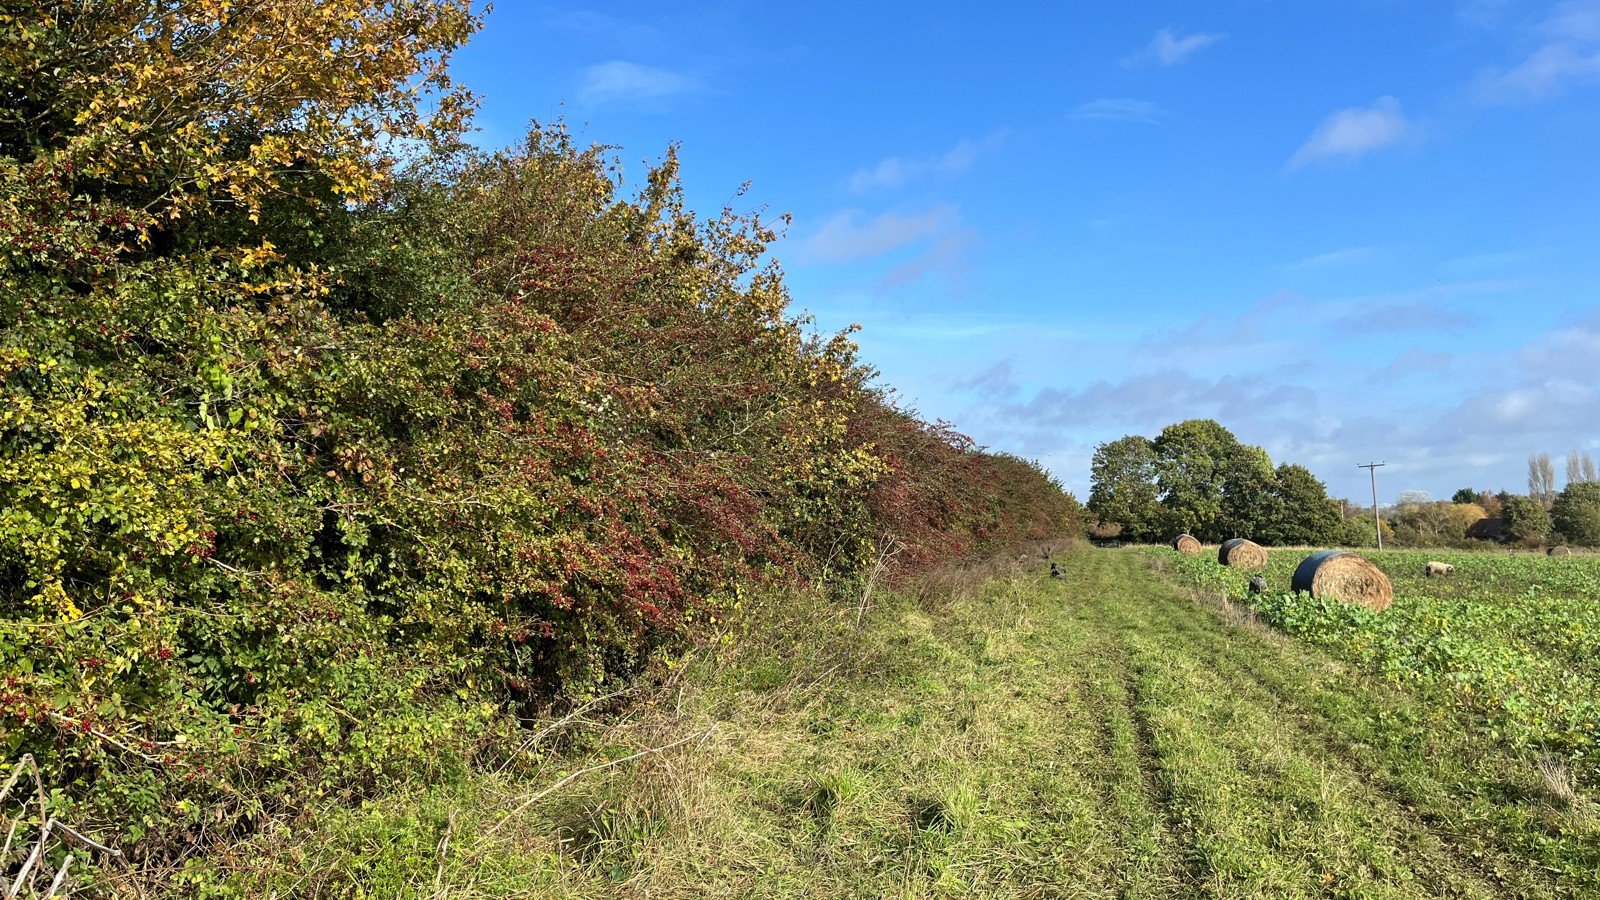 Image of Hedgerow and bales